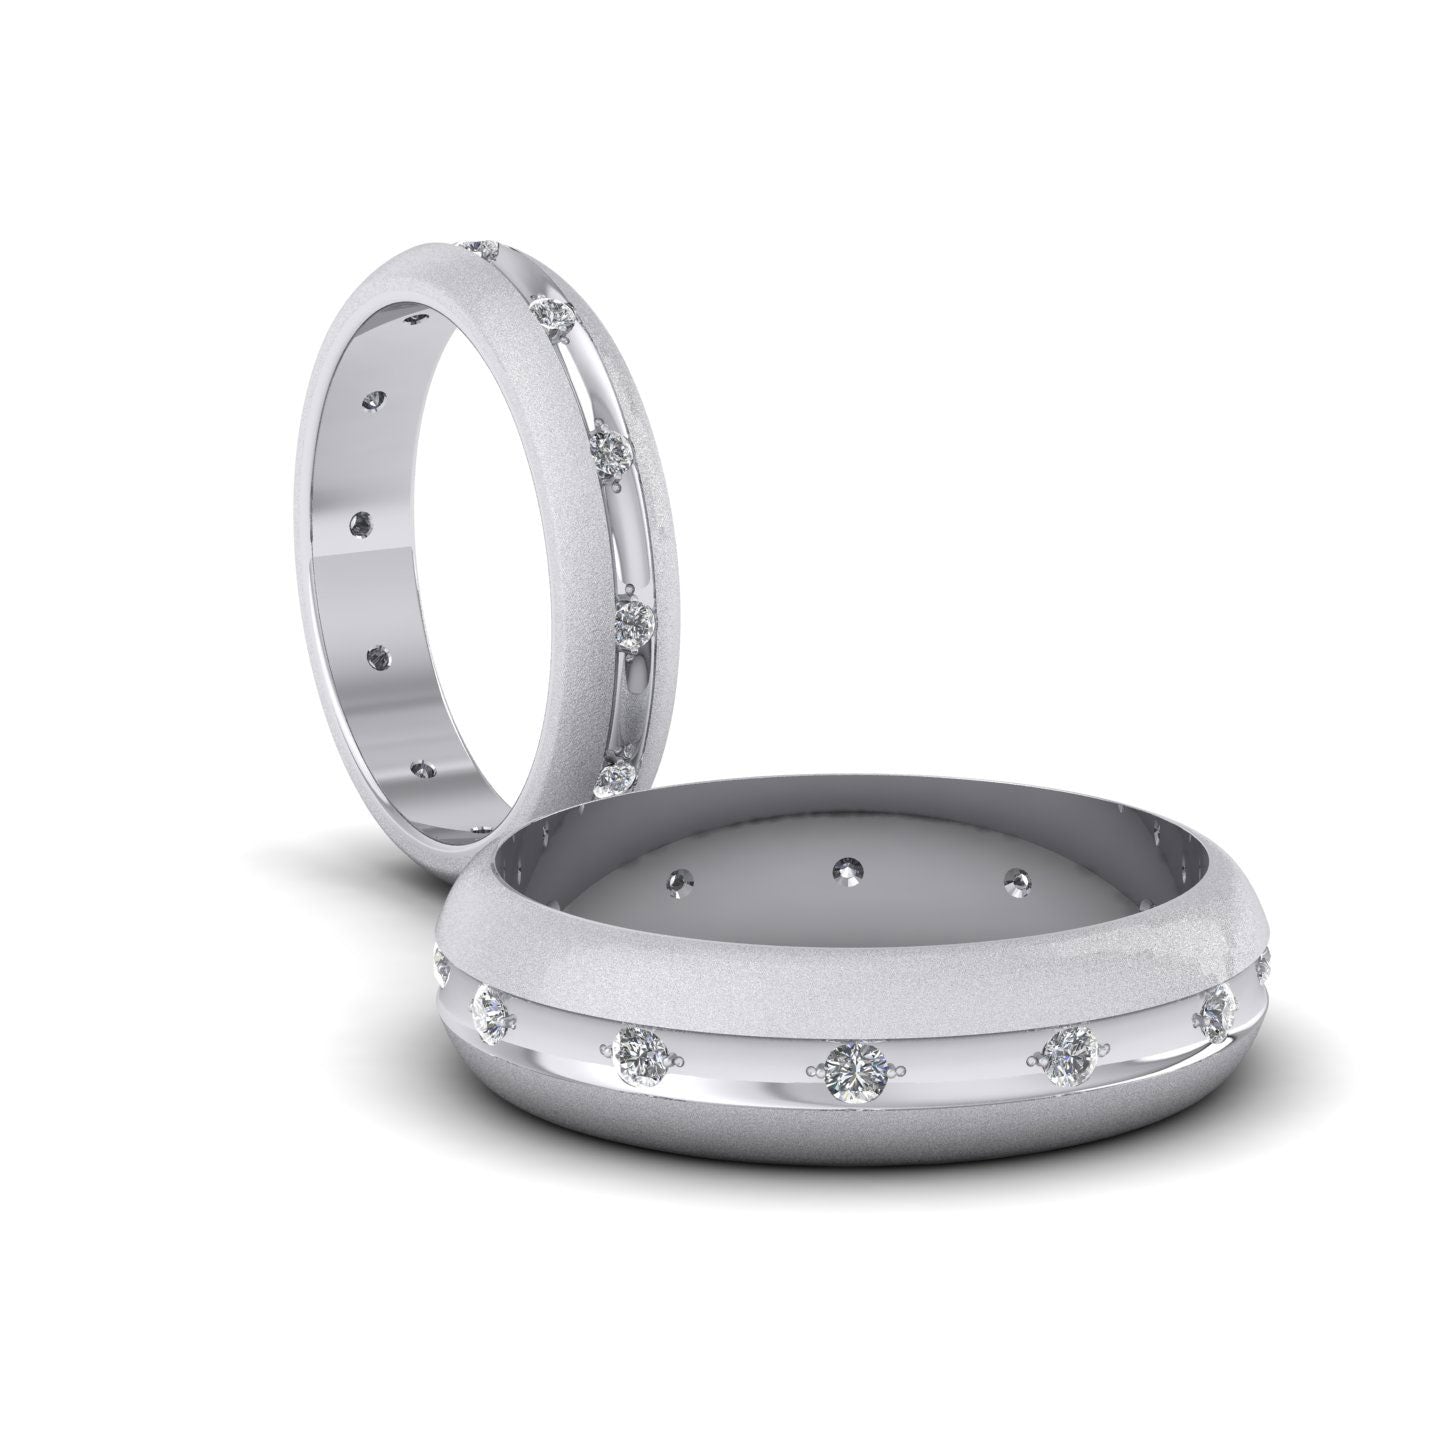 Wedding Ring With Concave Groove Set With Twelve Diamonds 4mm Wide In 500 Palladium